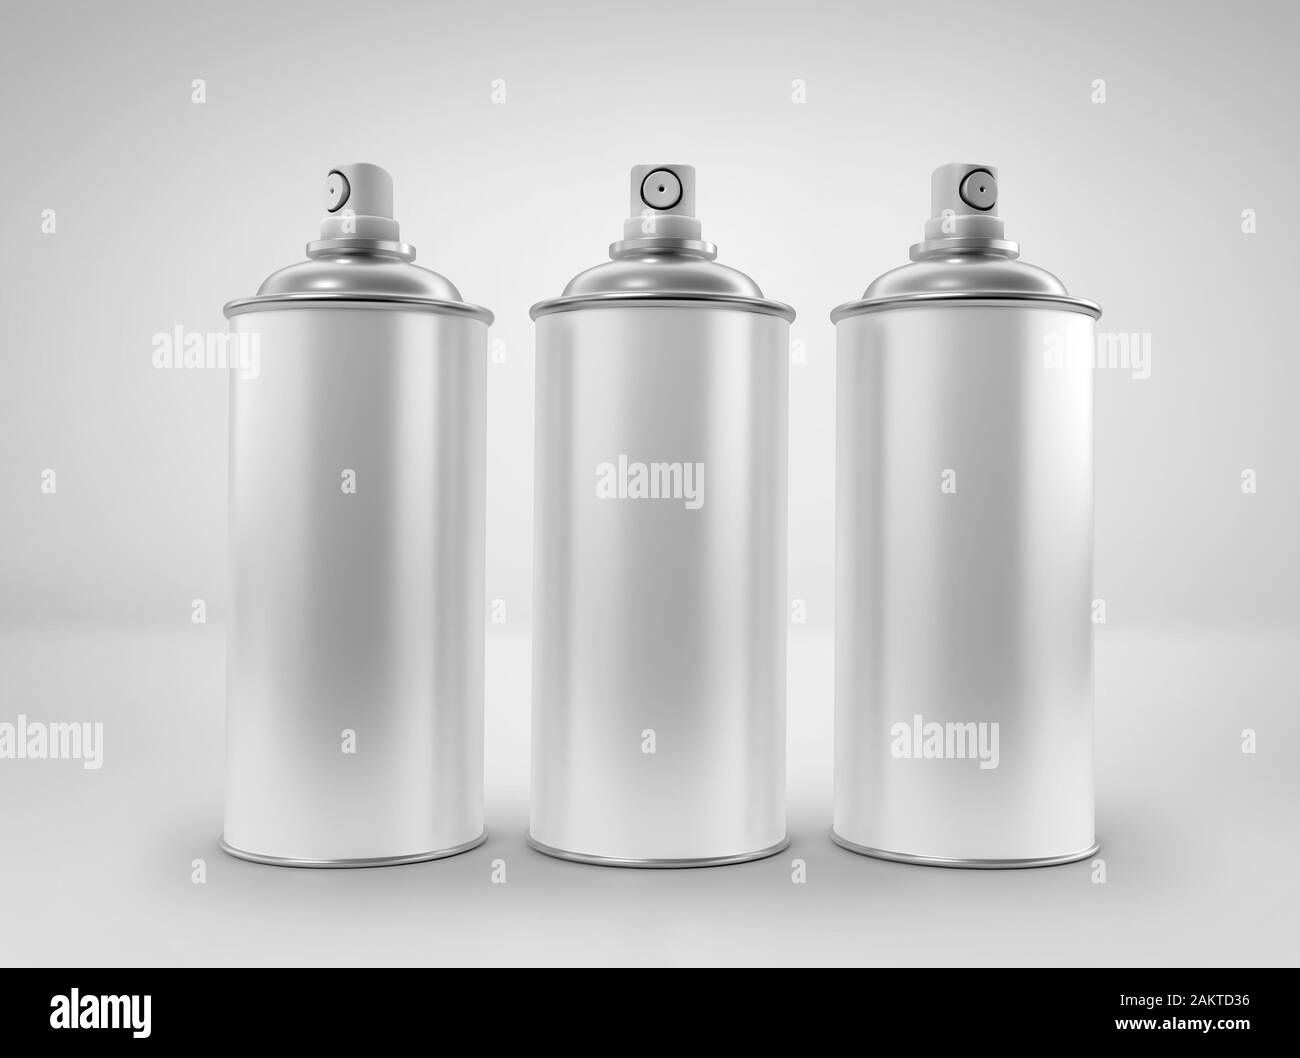 Download Blank White Aerosol Paint Spray Can Mockup Clear Spray Bottle 3d Rendering Isolated On Light Background Aluminum Cosmetic Bottle Stock Photo Alamy